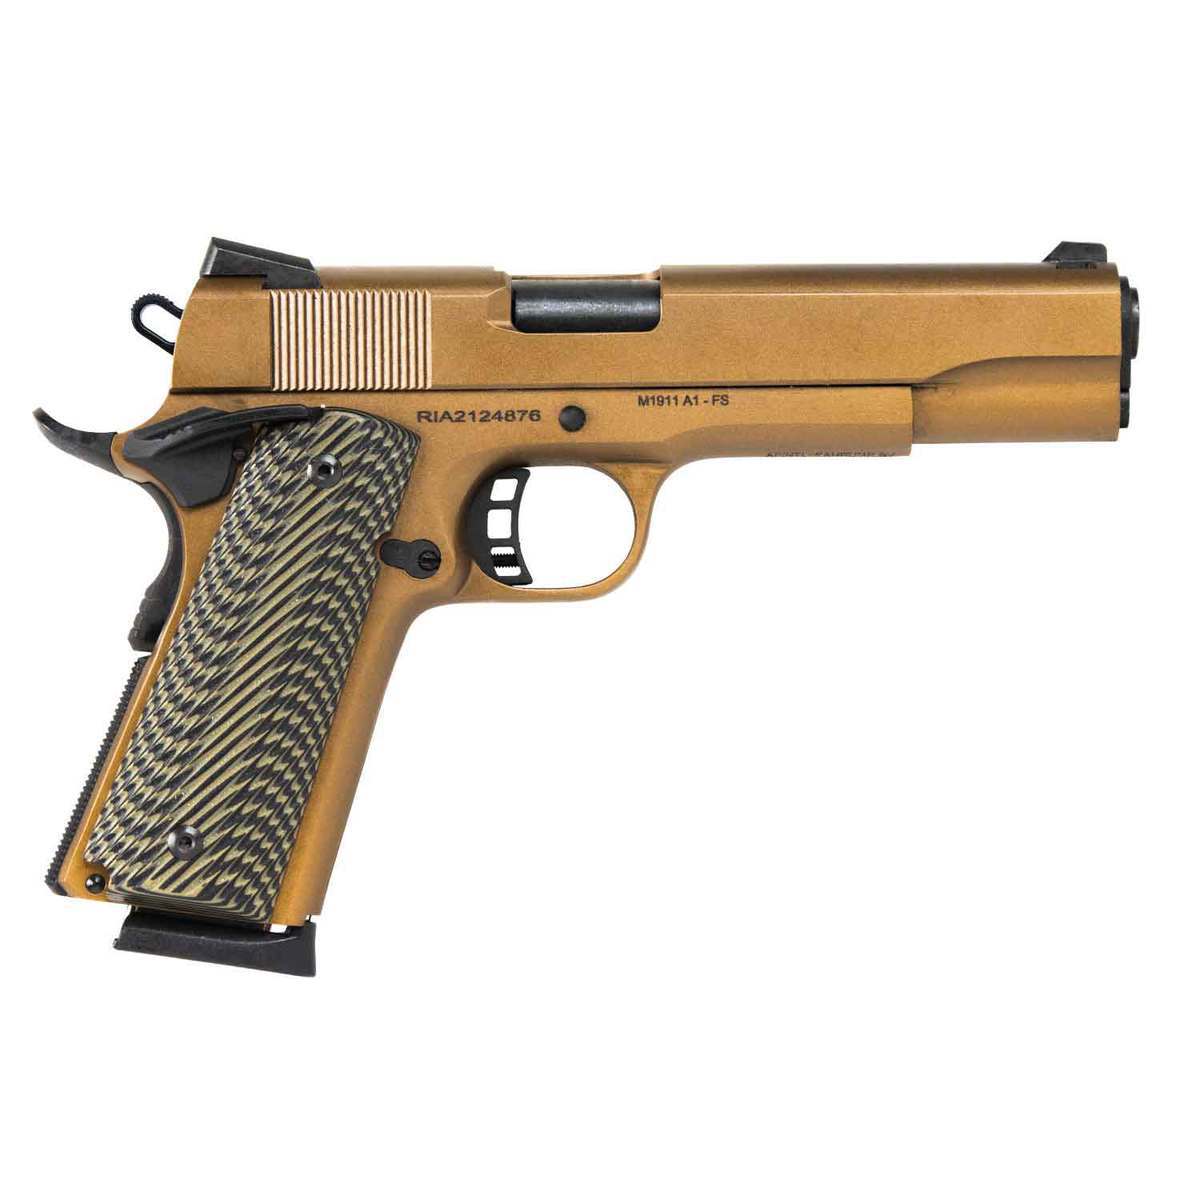 Rock Island Armory M1911 A1 Fs Tactical 45 Auto Acp 5in Burnt Bronzegreen Pistol 81 Rounds 4273